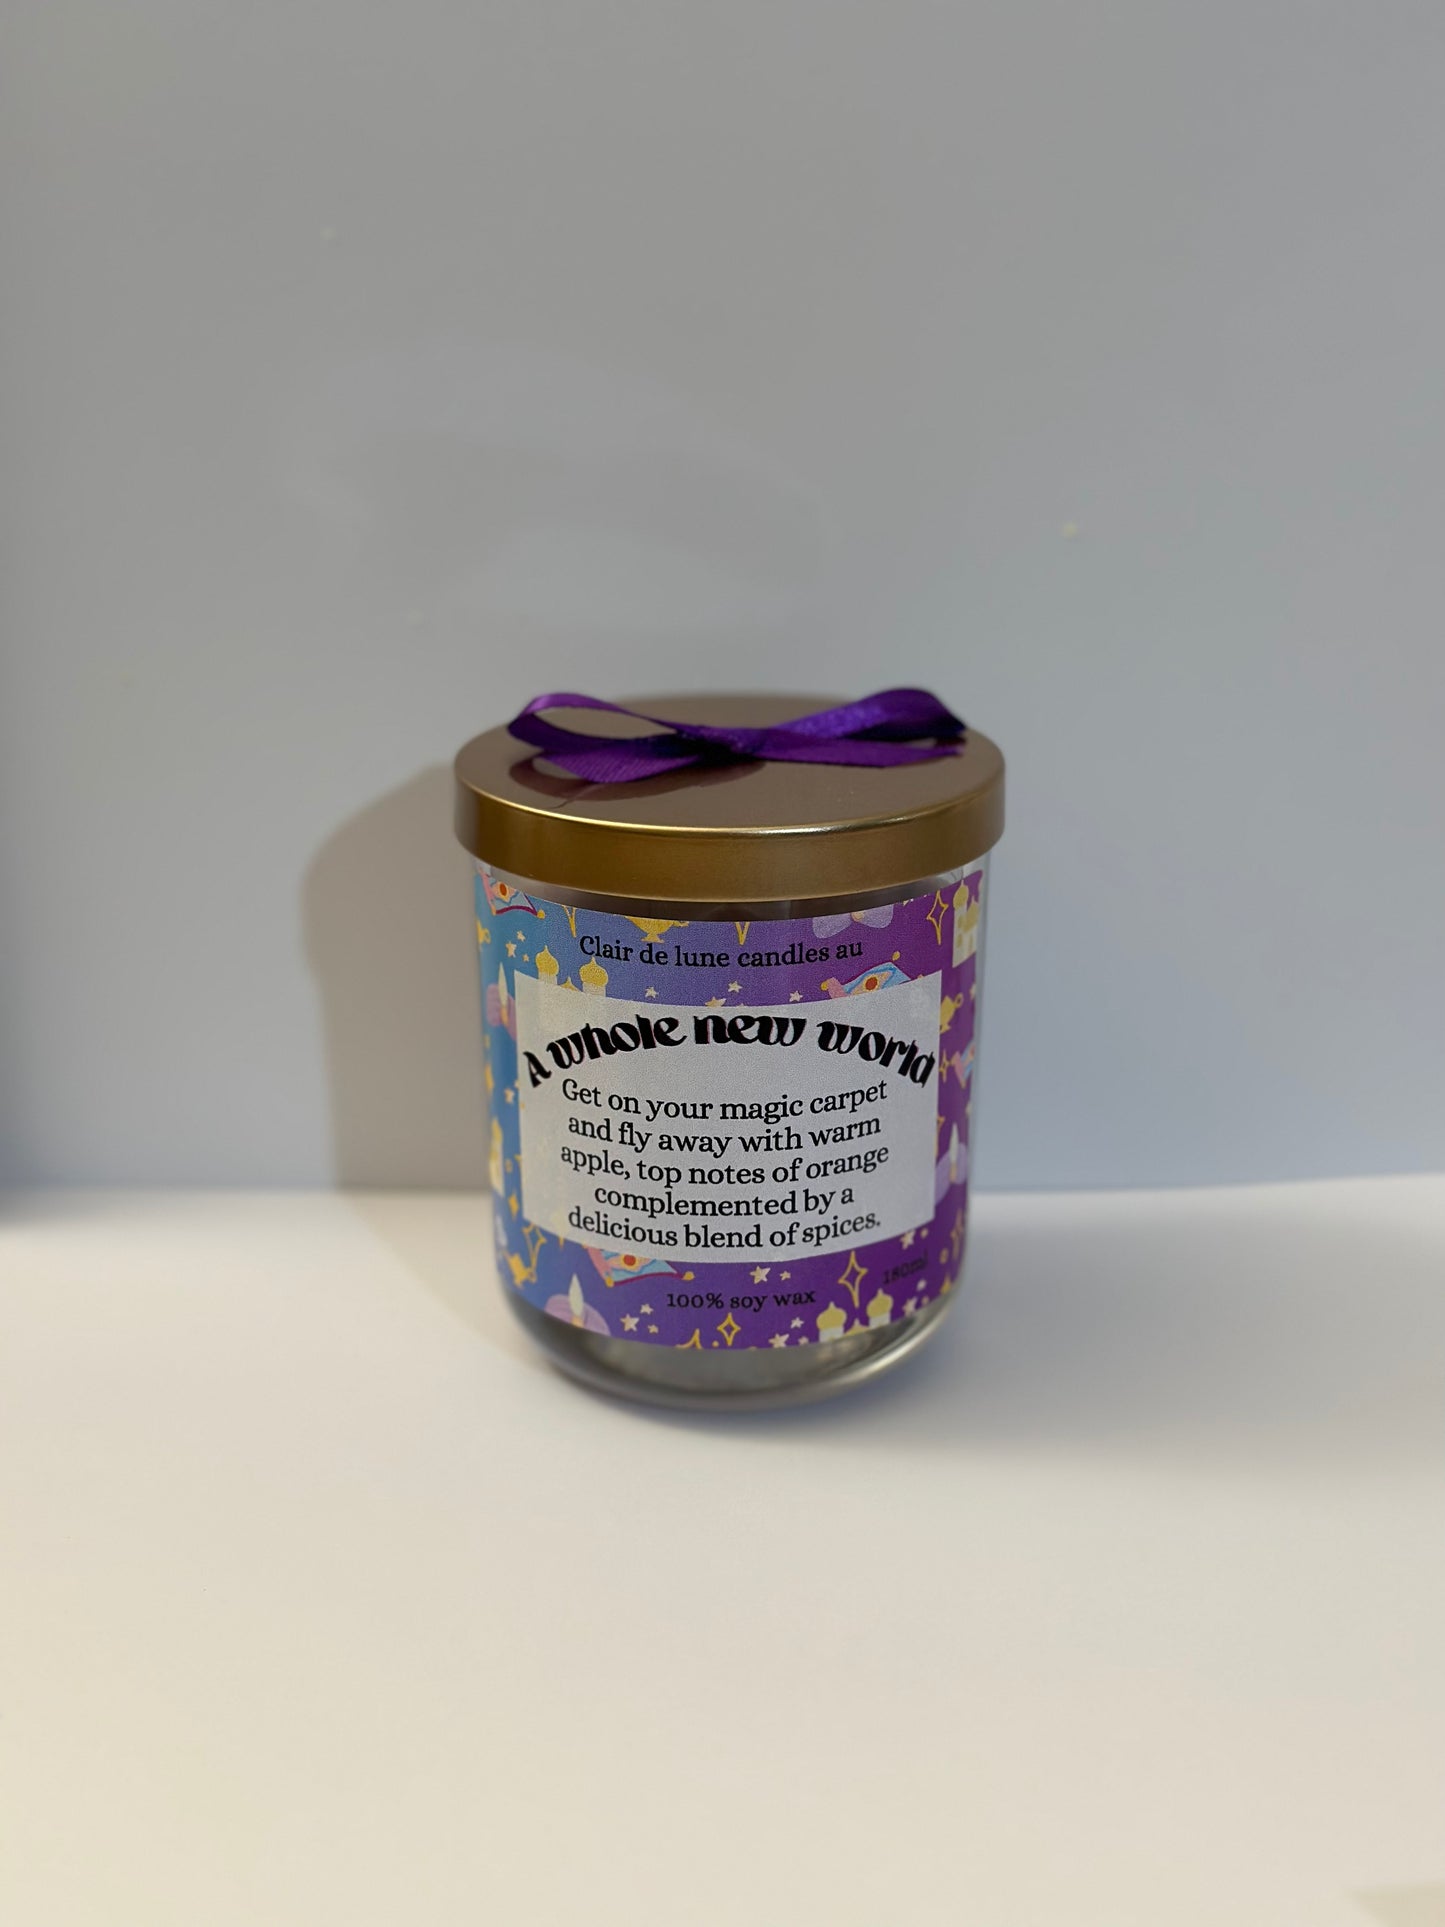 A whole new world candle